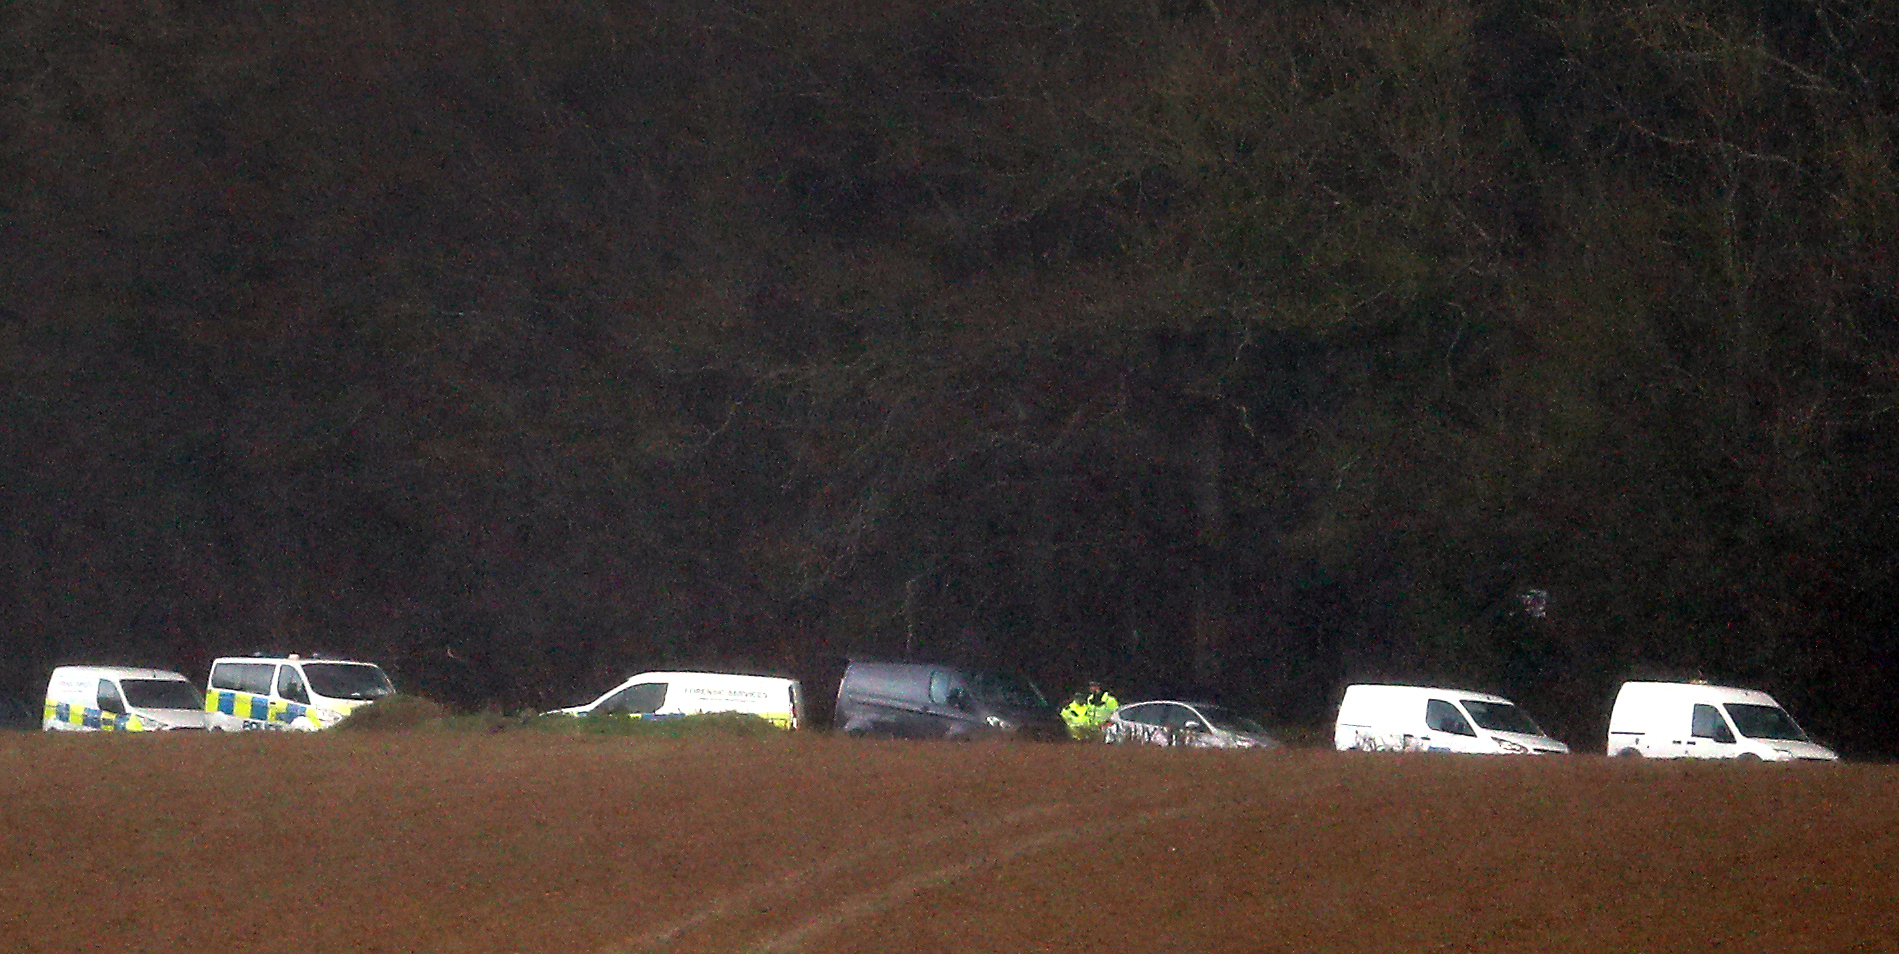 A private ambulance (middle) amongst police vehicles at the search in an area of woodland. Photo: PA